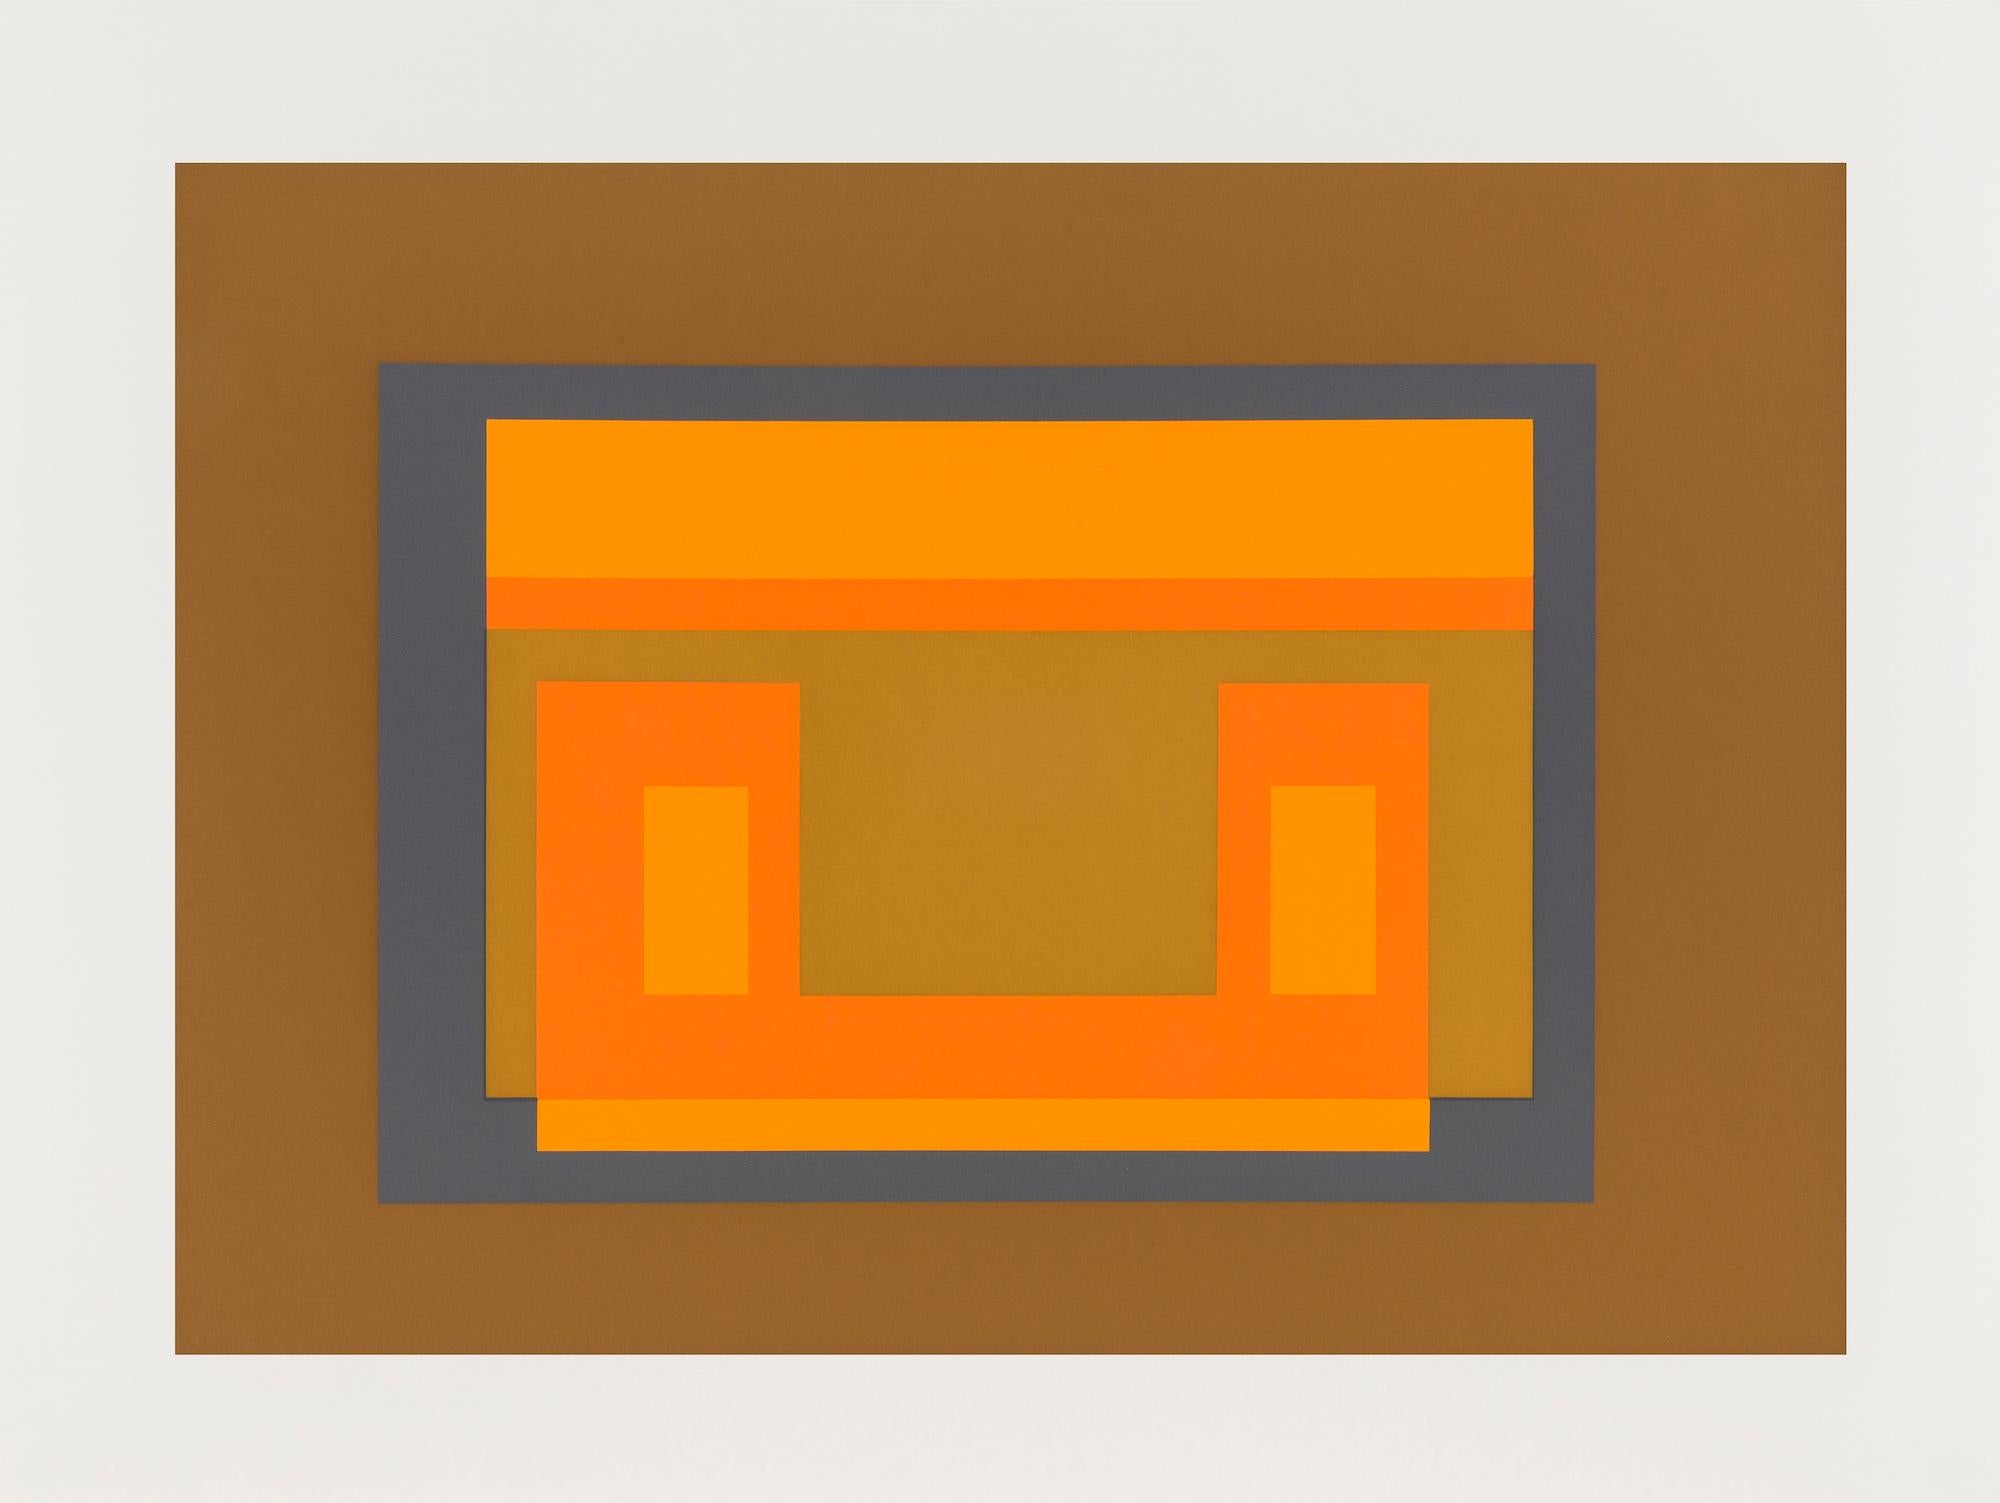 Formulation: Articulation I & II -- Colour Theory, Minimalism by Josef Albers 3